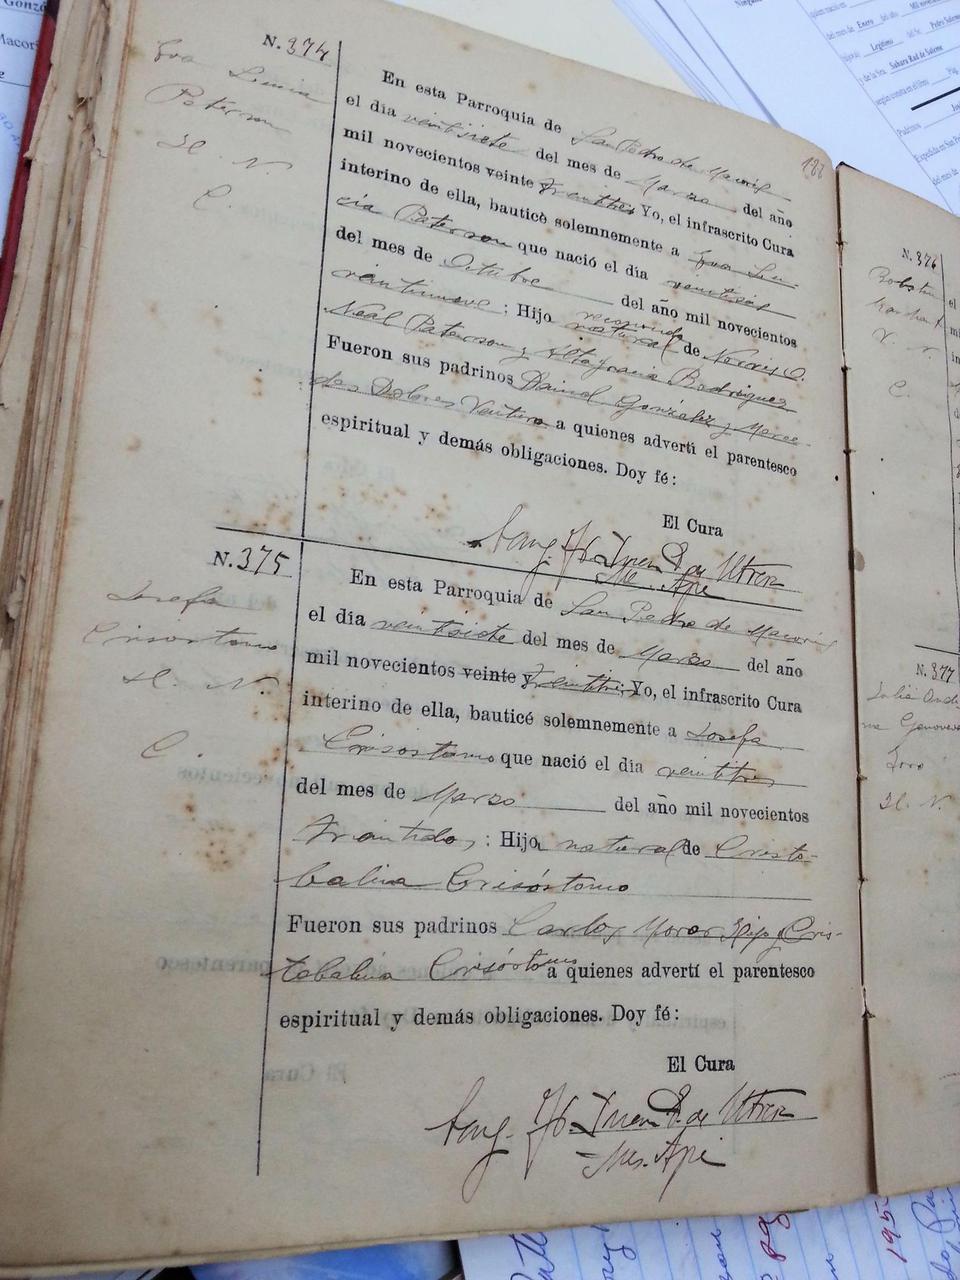 A baptism ledger from 1923